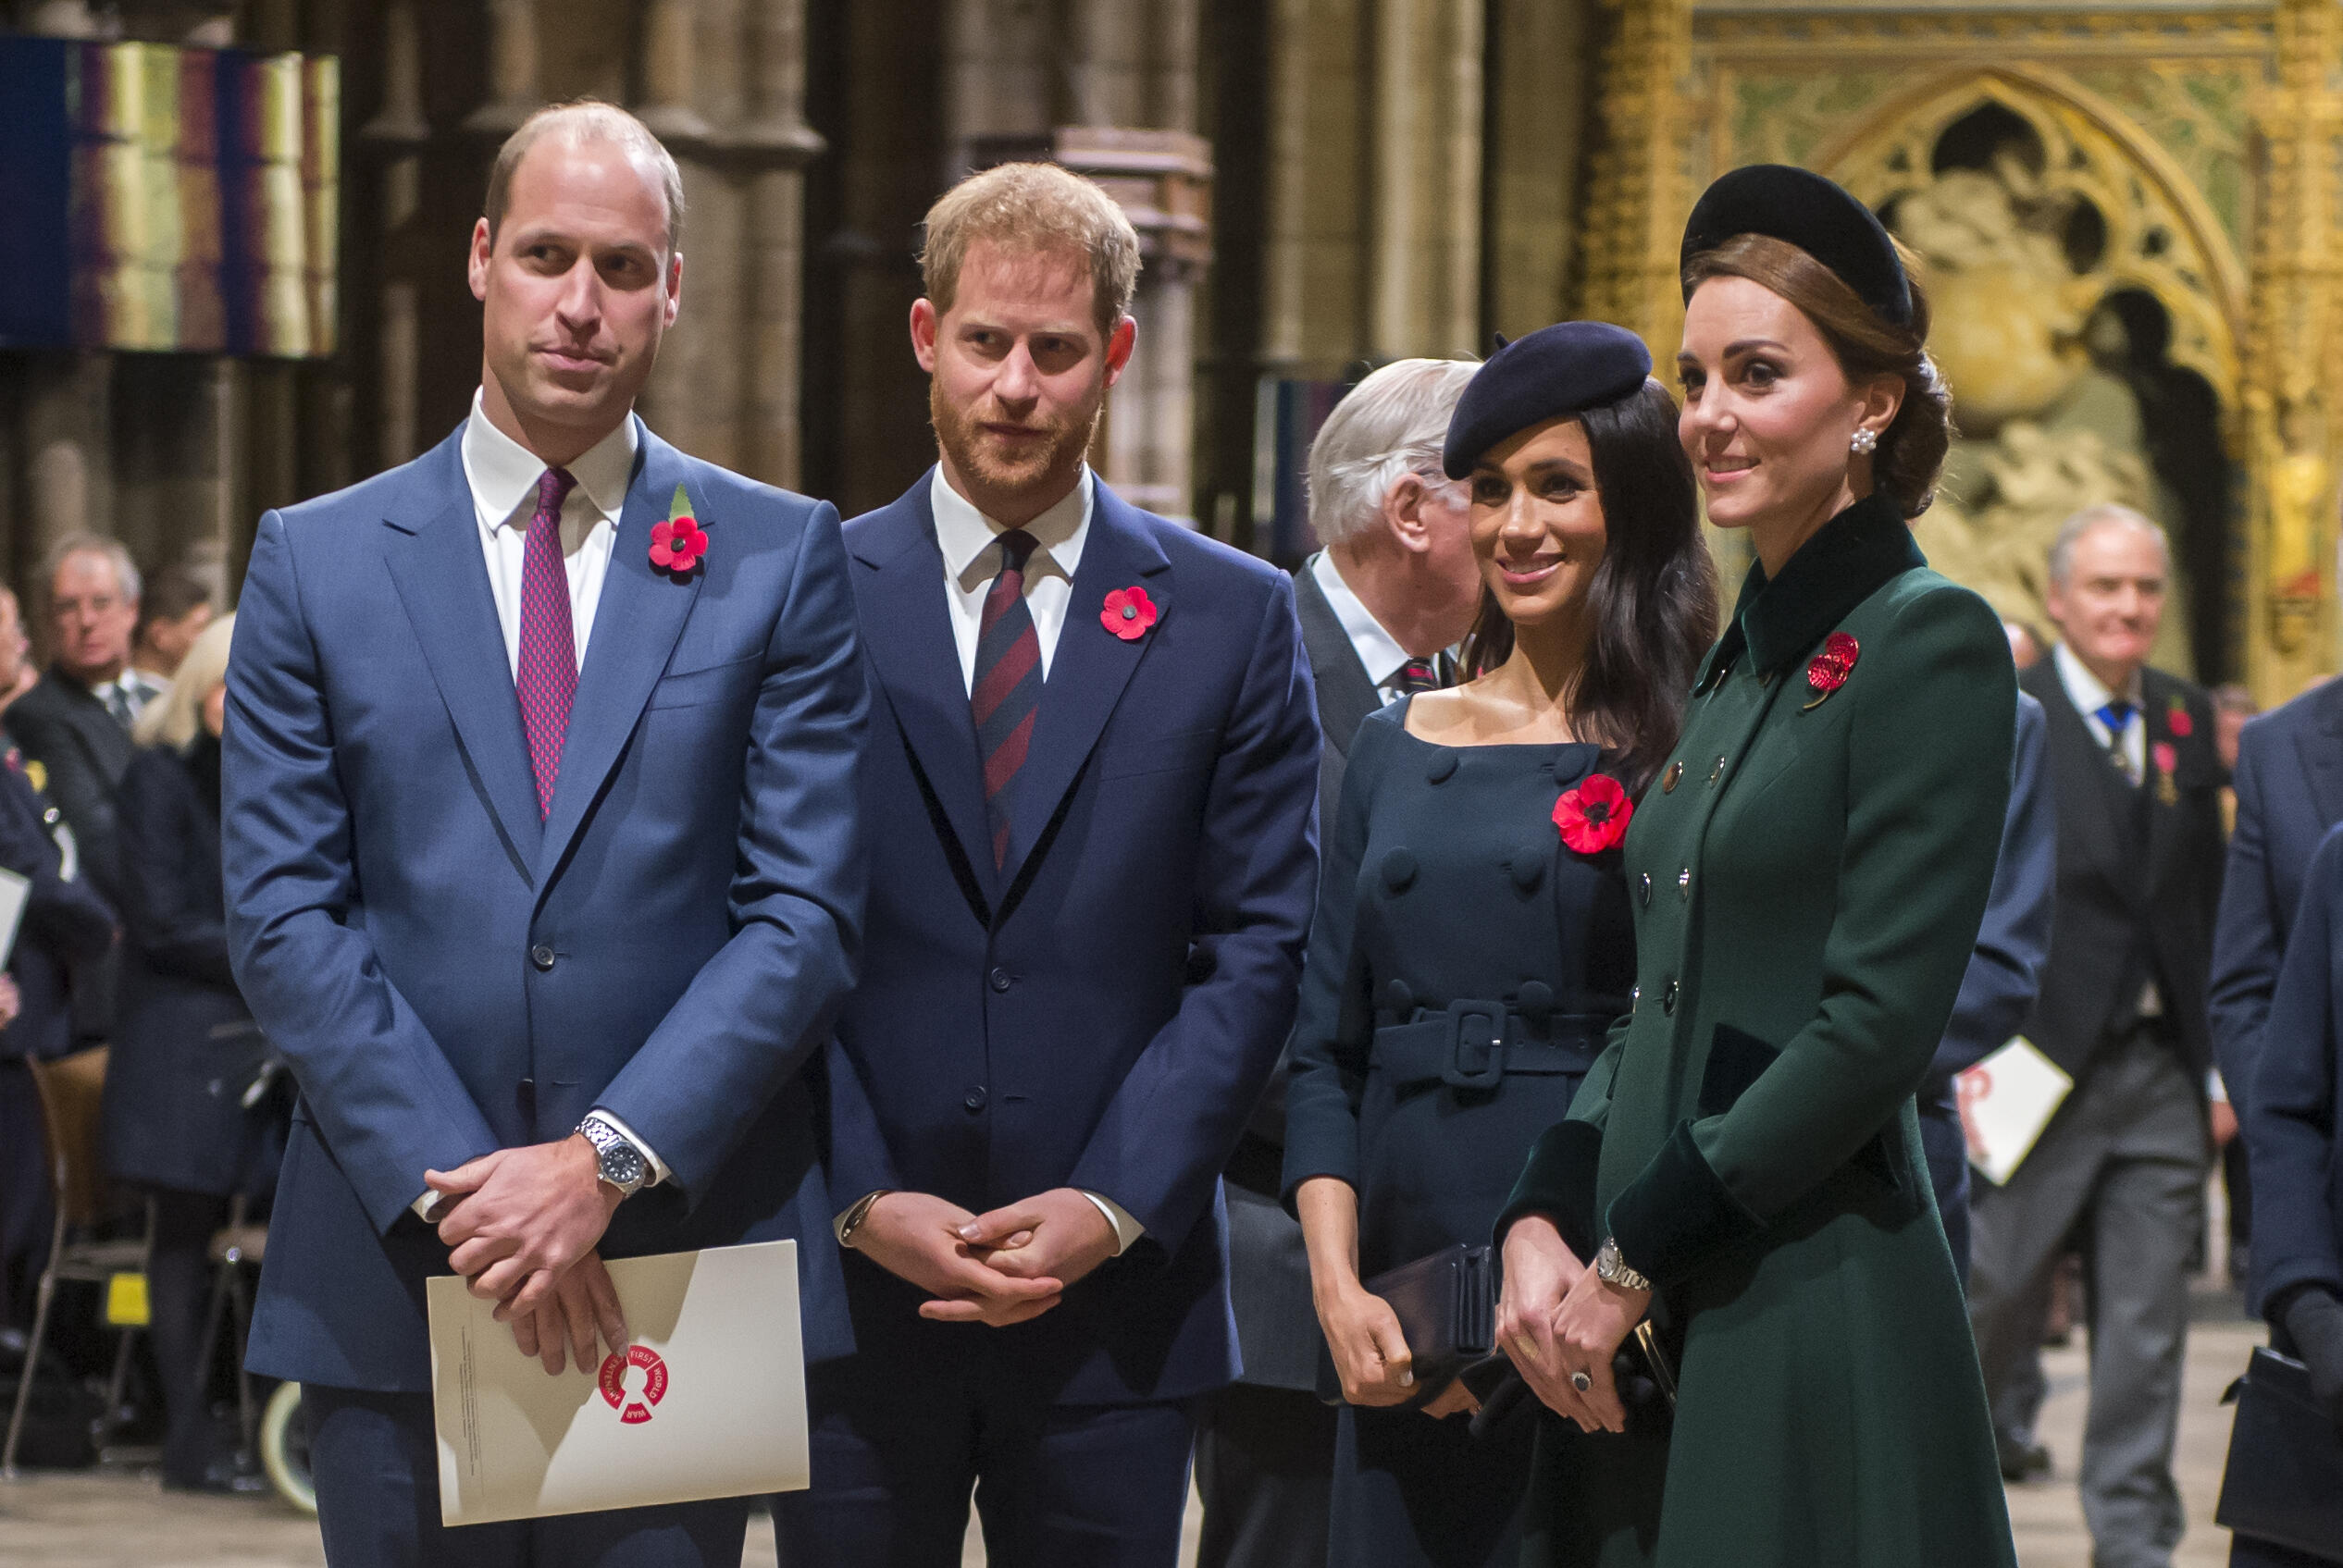 Princes William & Harry Are Feuding, Not Meghan Markle & Kate Middleton - Thumbnail Image